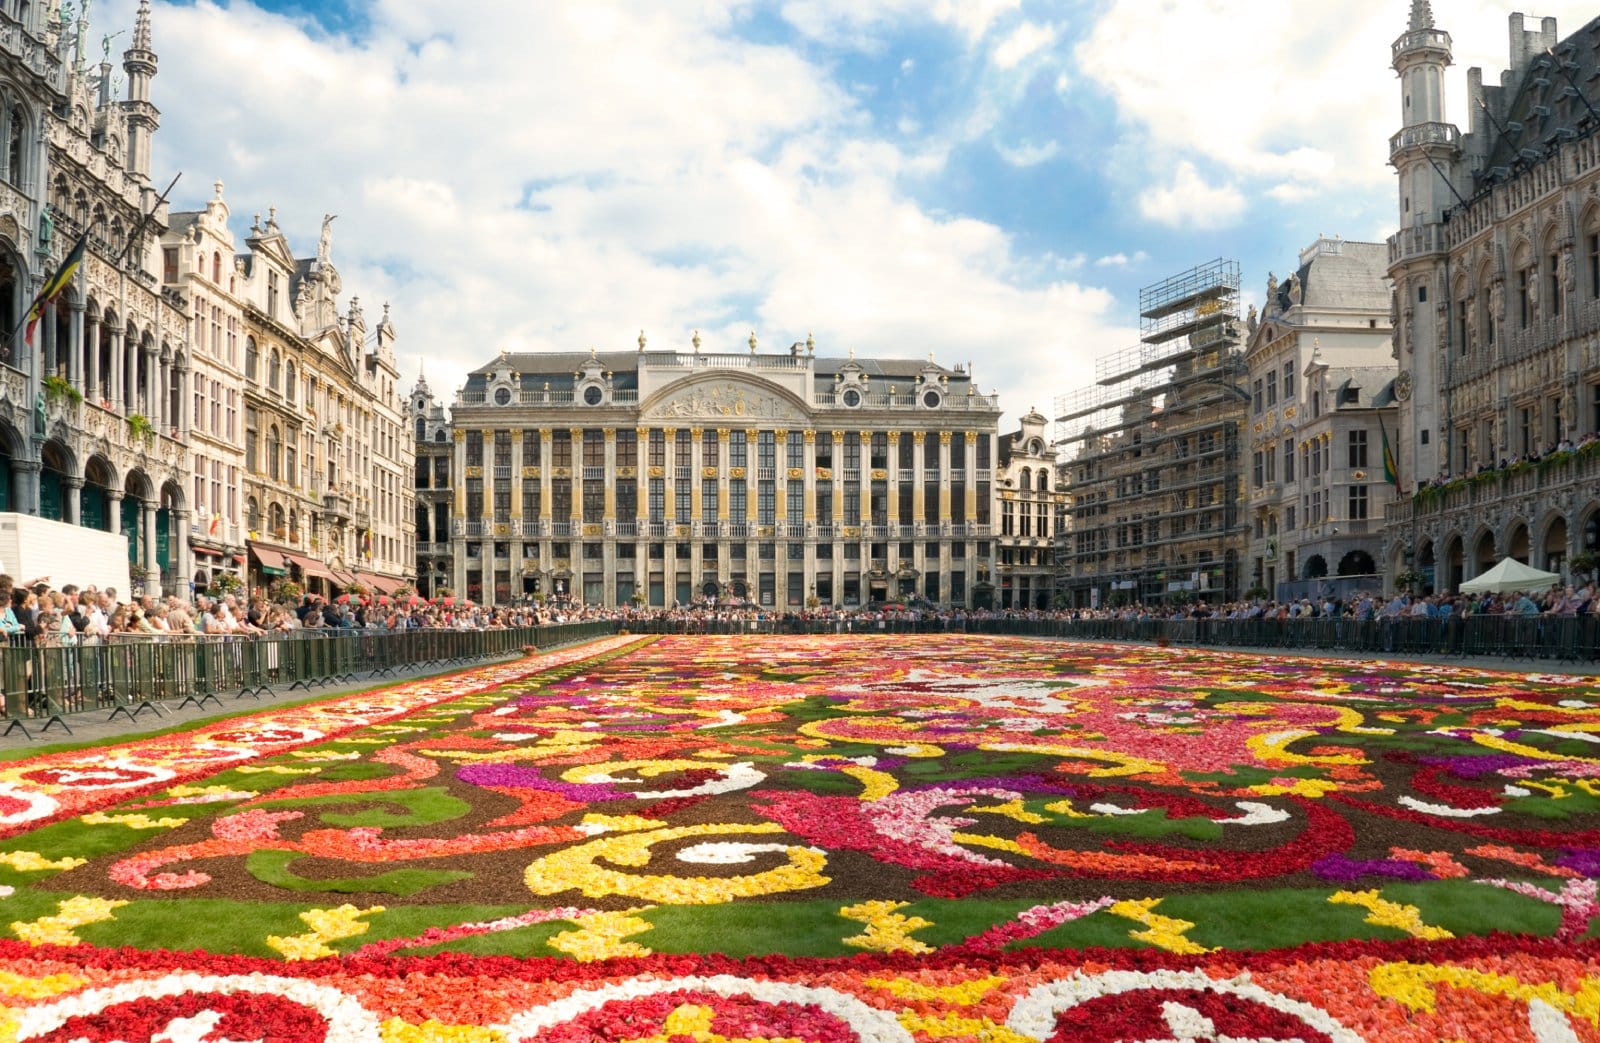 <p class="wp-caption-text">Image Credit: Shutterstock / Andrjuss</p>  <p><span>Brussels’ Grand Place is transformed into a stunning floral display every two years with a giant carpet made entirely of begonias. The event lasts for a few days in August, drawing spectators from around the world.</span></p> <p><b>Insider’s Tip: </b><span>View the carpet from the balcony of the City Hall for the best views.</span></p> <p><b>When to Travel: </b><span>Mid-August, biennially</span></p> <p><b>How to Get There: </b><span>Brussels is well-connected by train and air. The Grand Place is centrally located and accessible on foot from many parts of the city.</span></p>